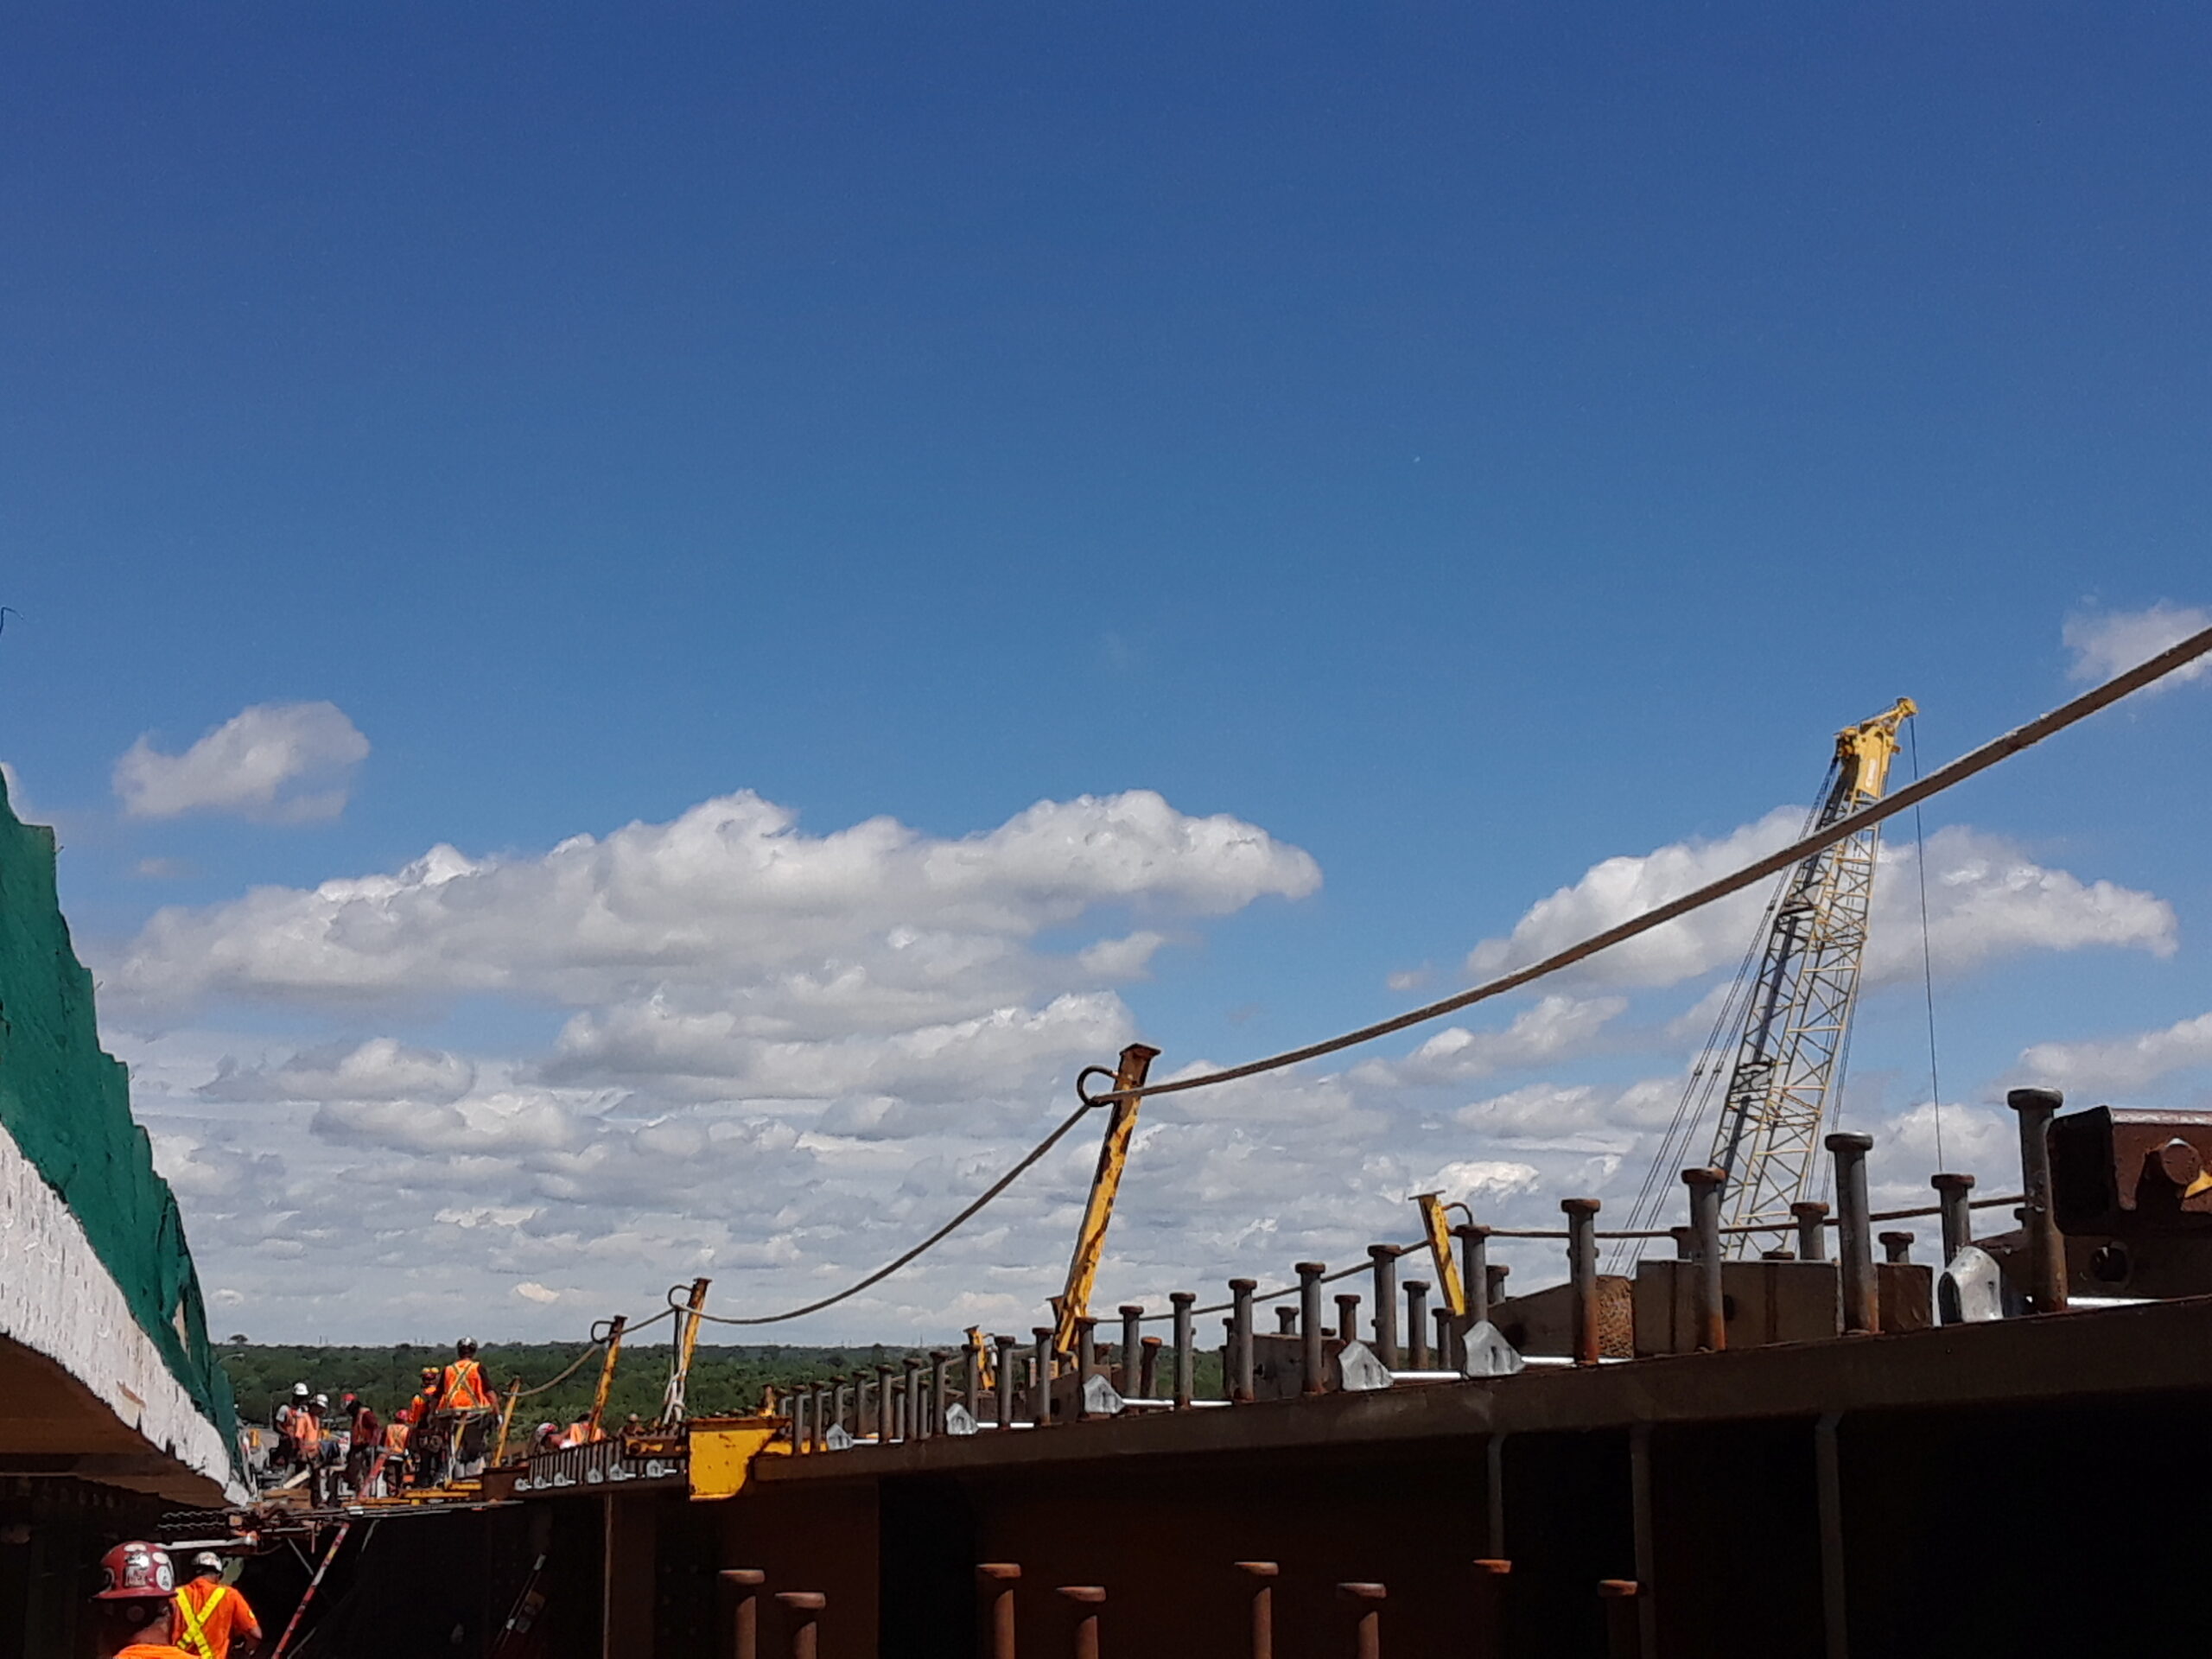 View from the false decking of work being done on the new girder section